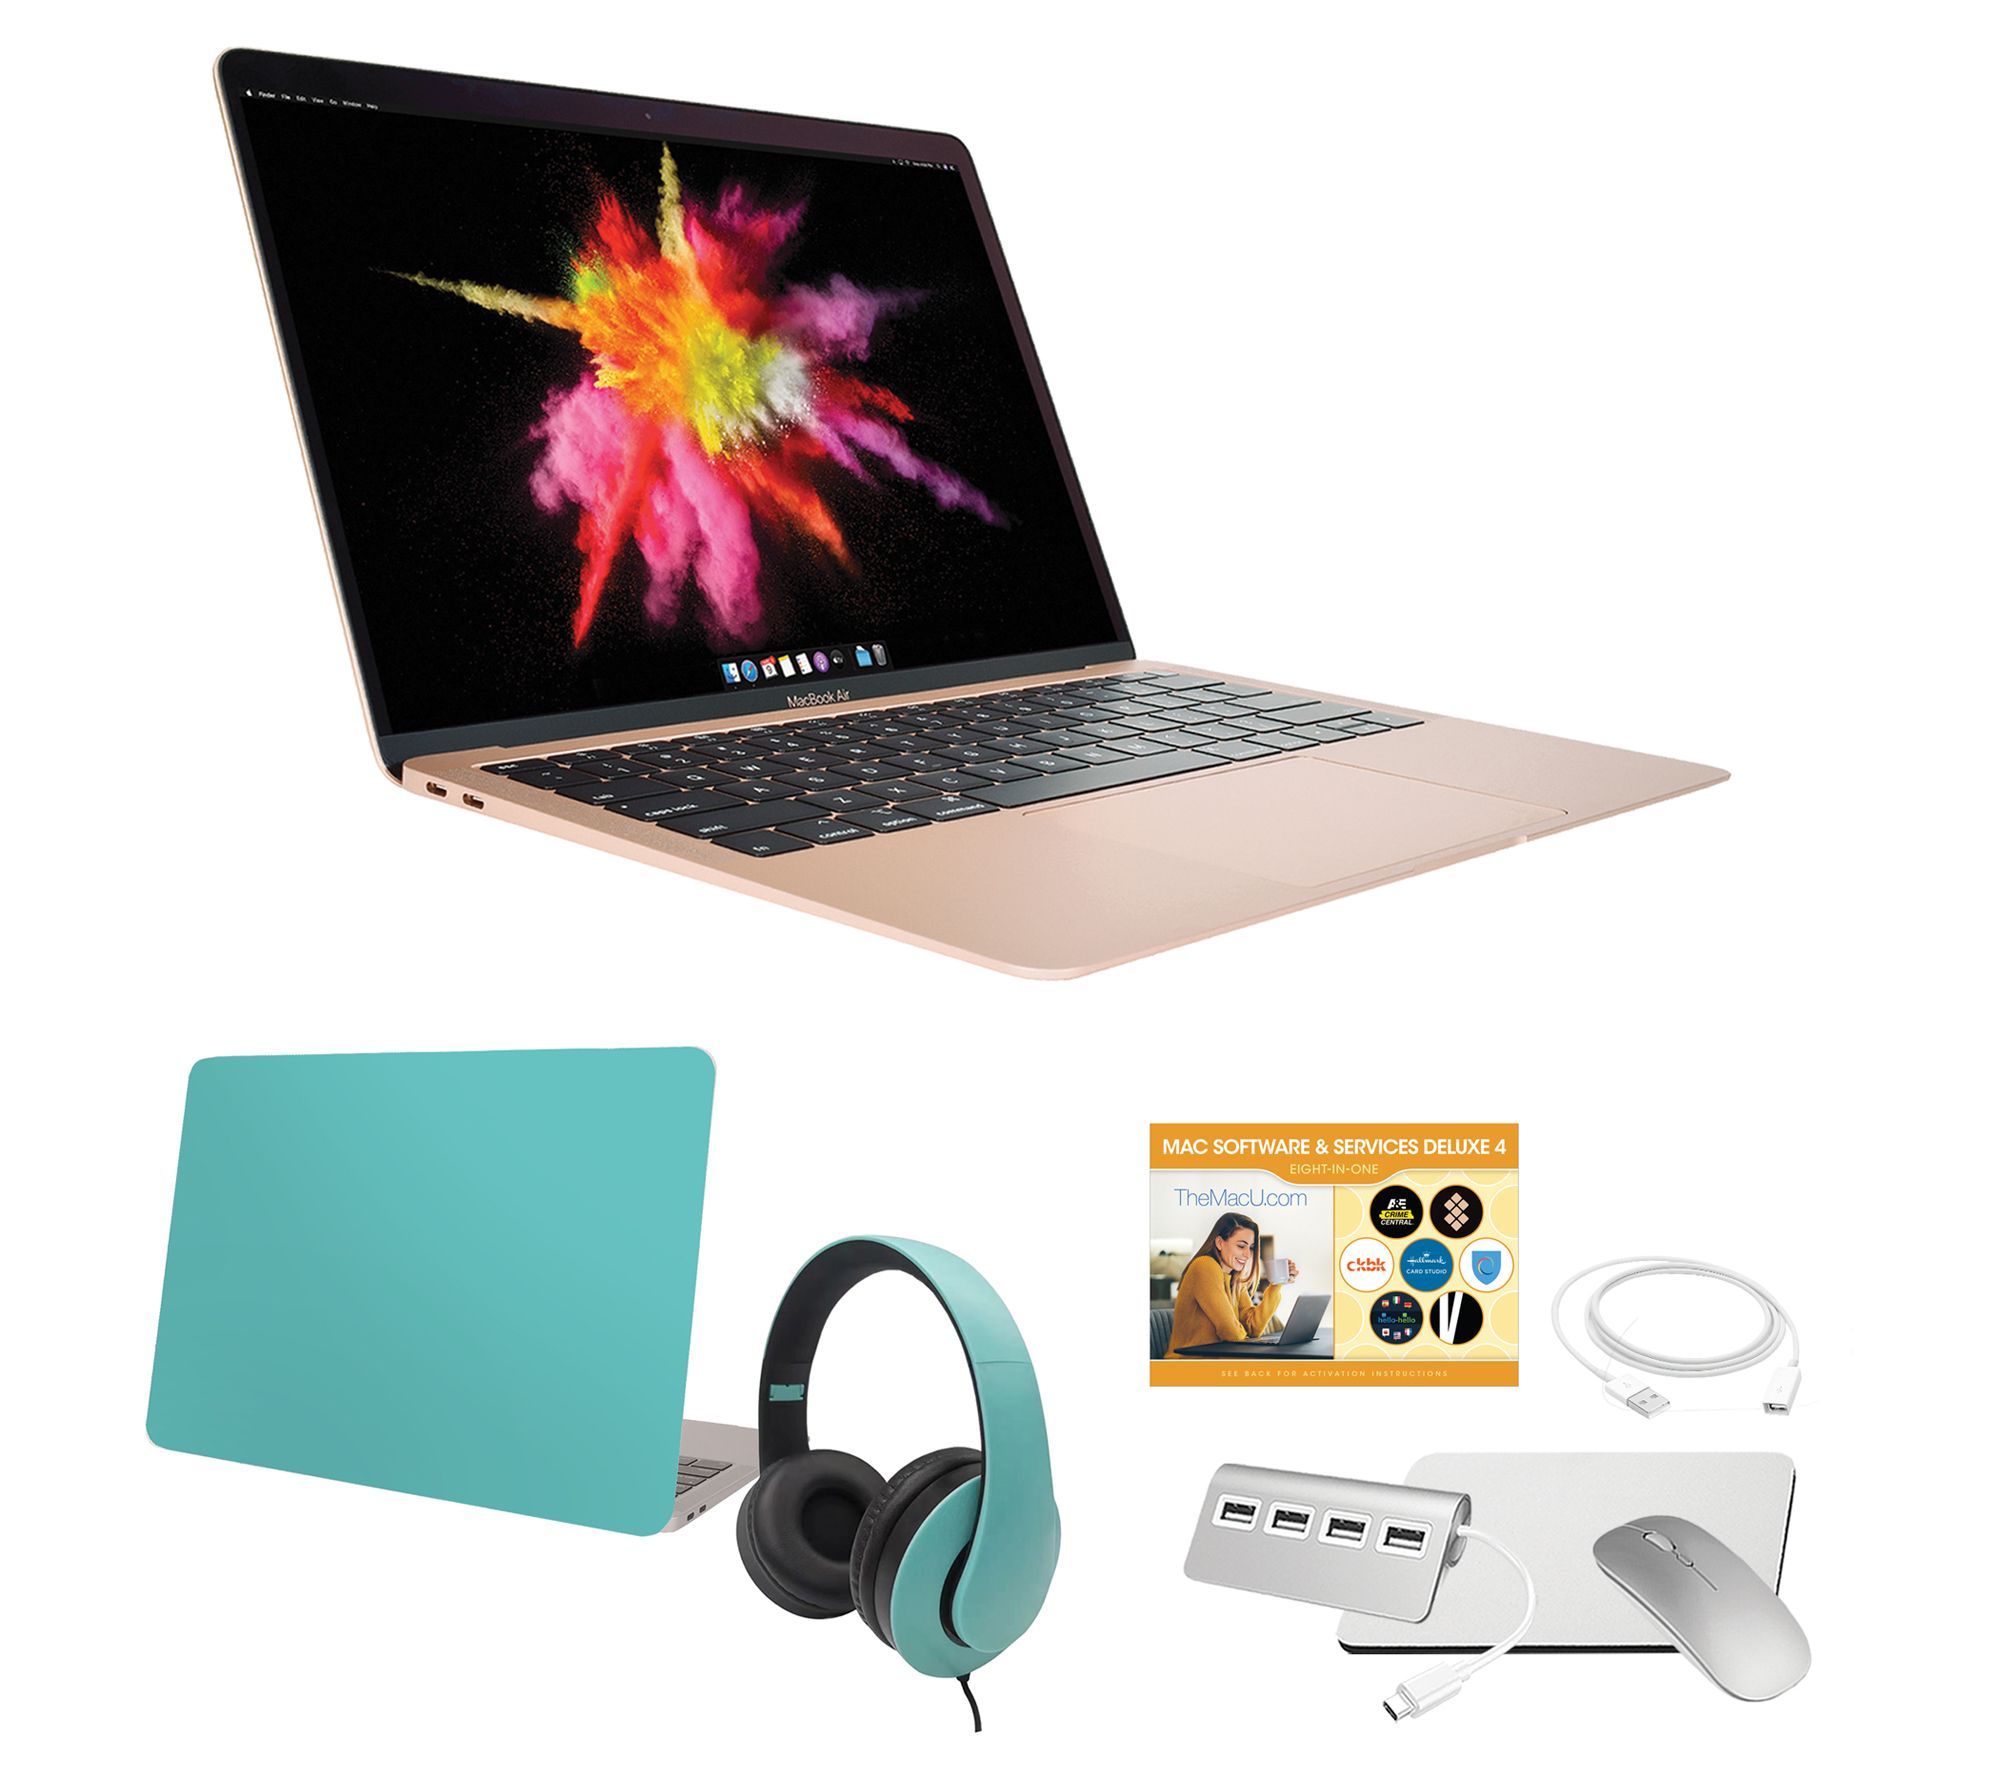 Mac-Warehouse: Clearance Sale on Apple products! Everything must go!